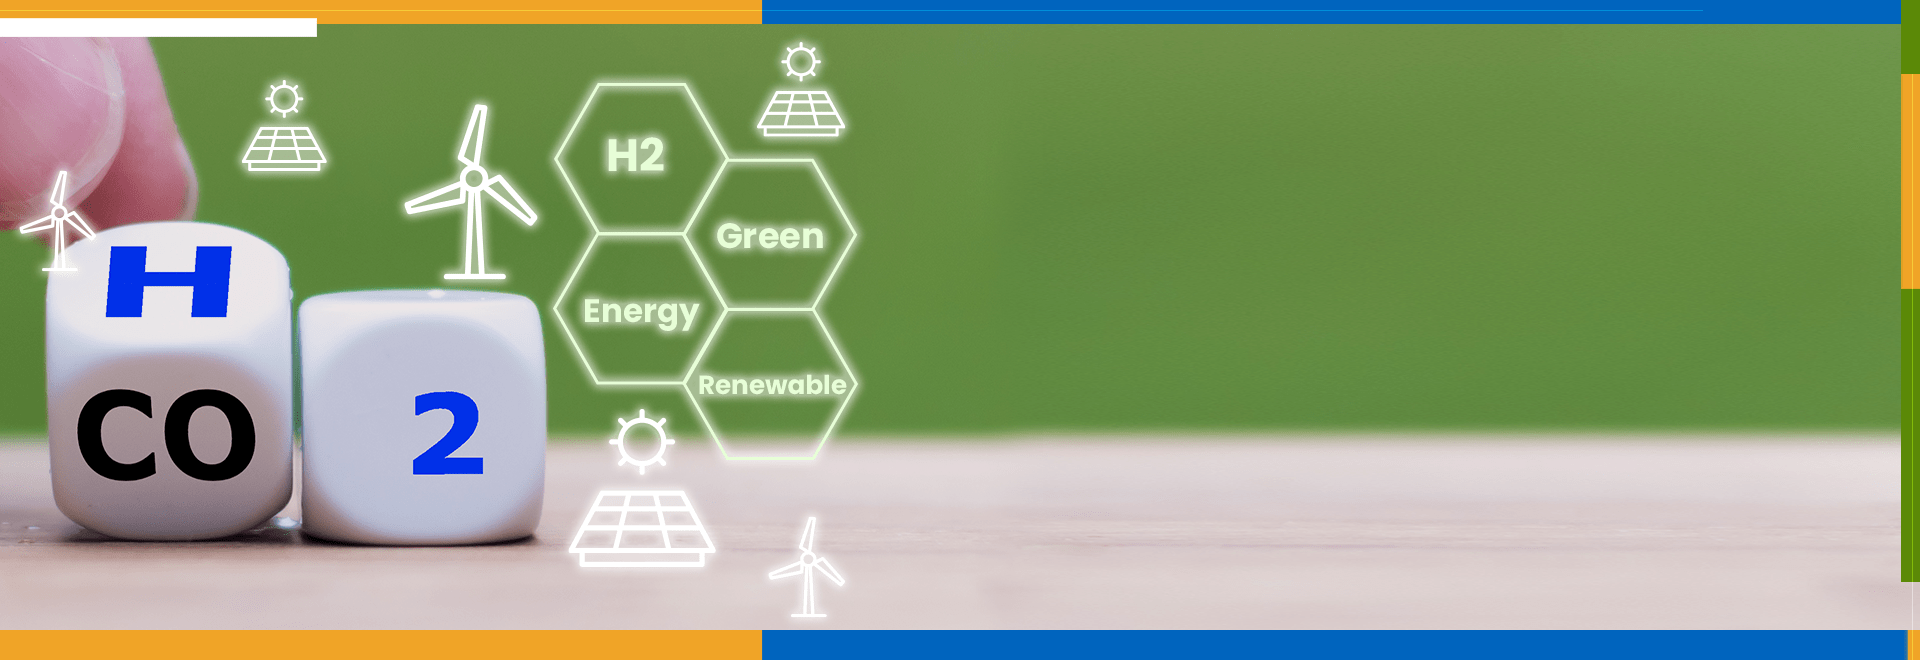 The key to the decarbonization of the industry lies in green hydrogen